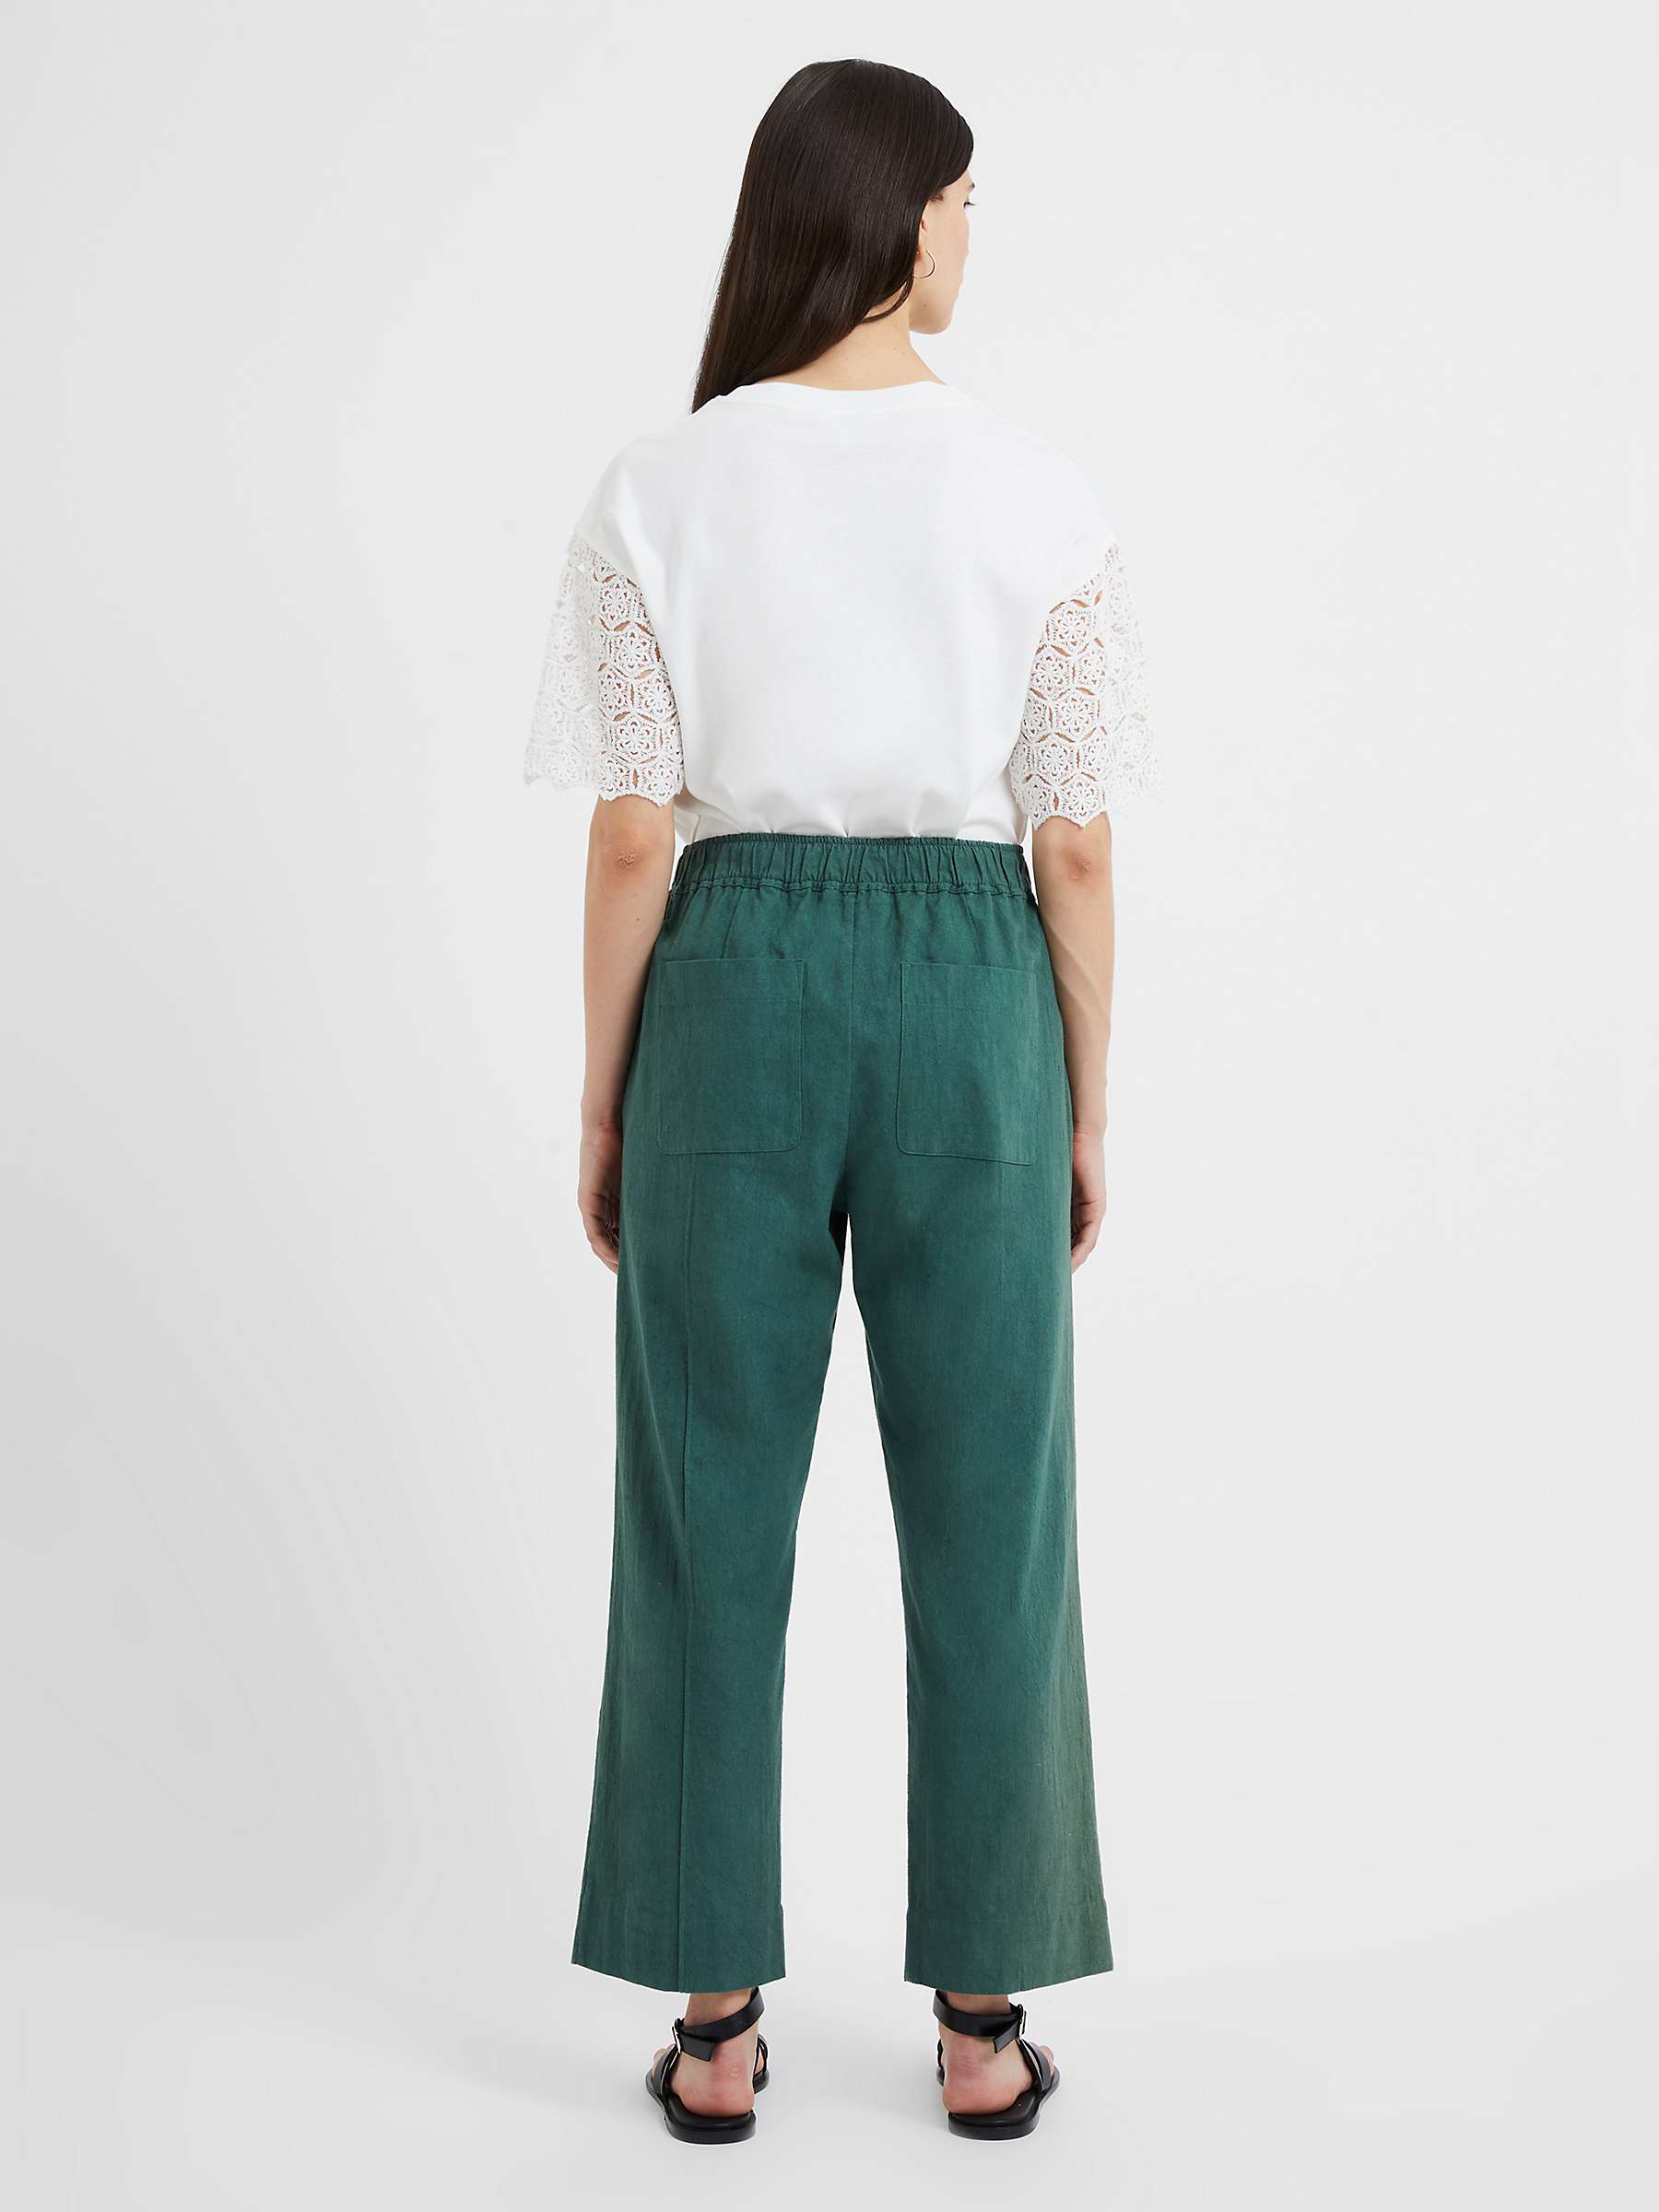 Buy Great Plains Crinkle Cotton Trousers, Tropical Green Online at johnlewis.com